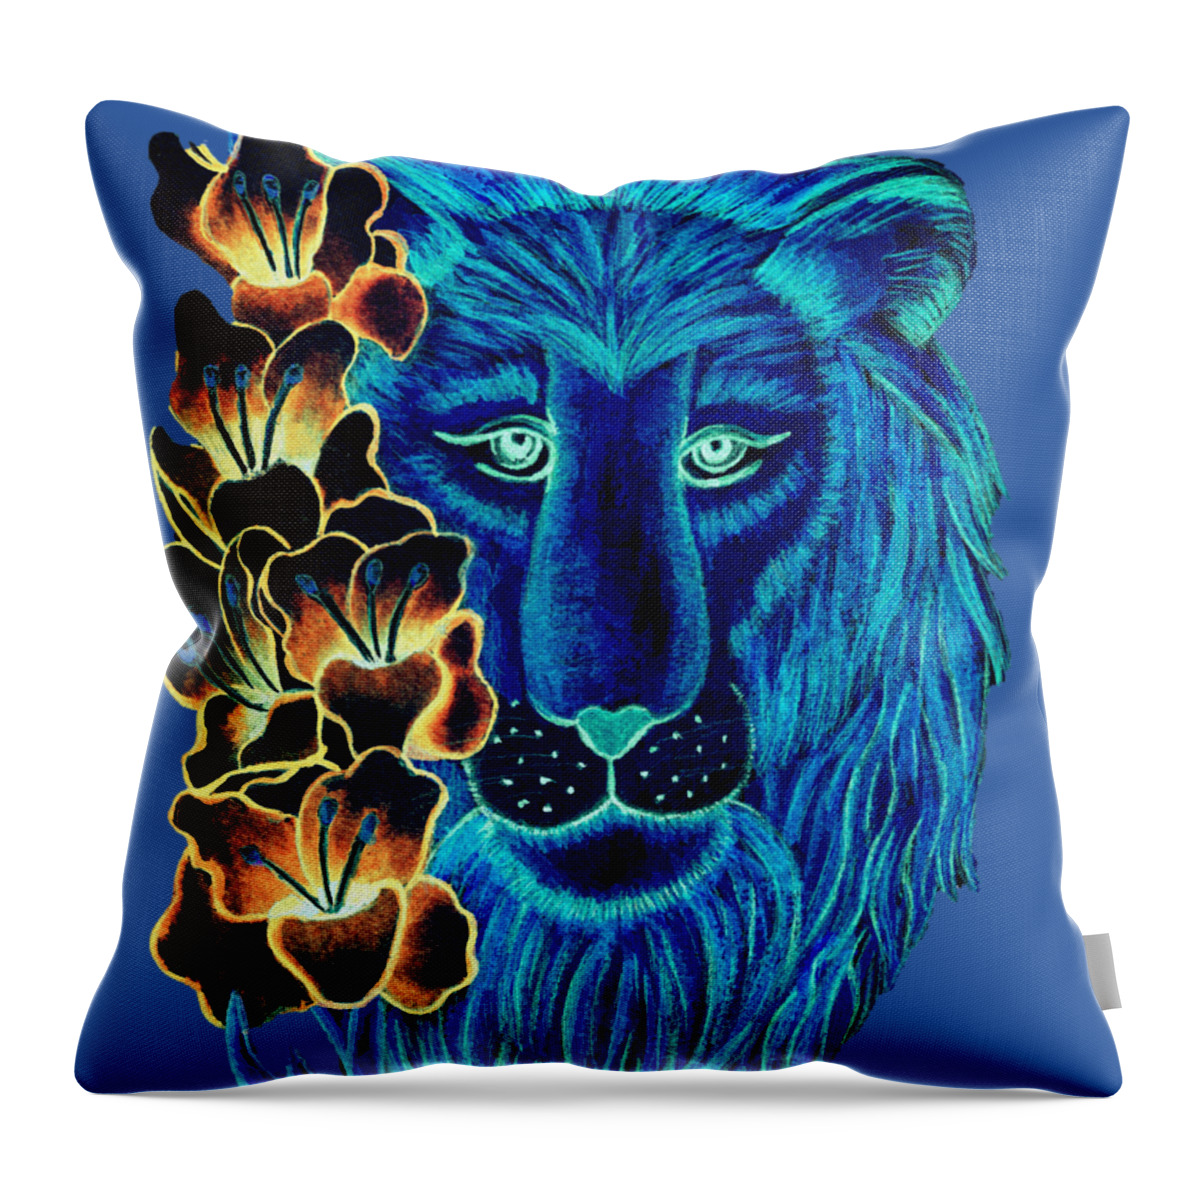 Leo Throw Pillow featuring the digital art Leo Gladiolus Blue and Black by Christina Wedberg